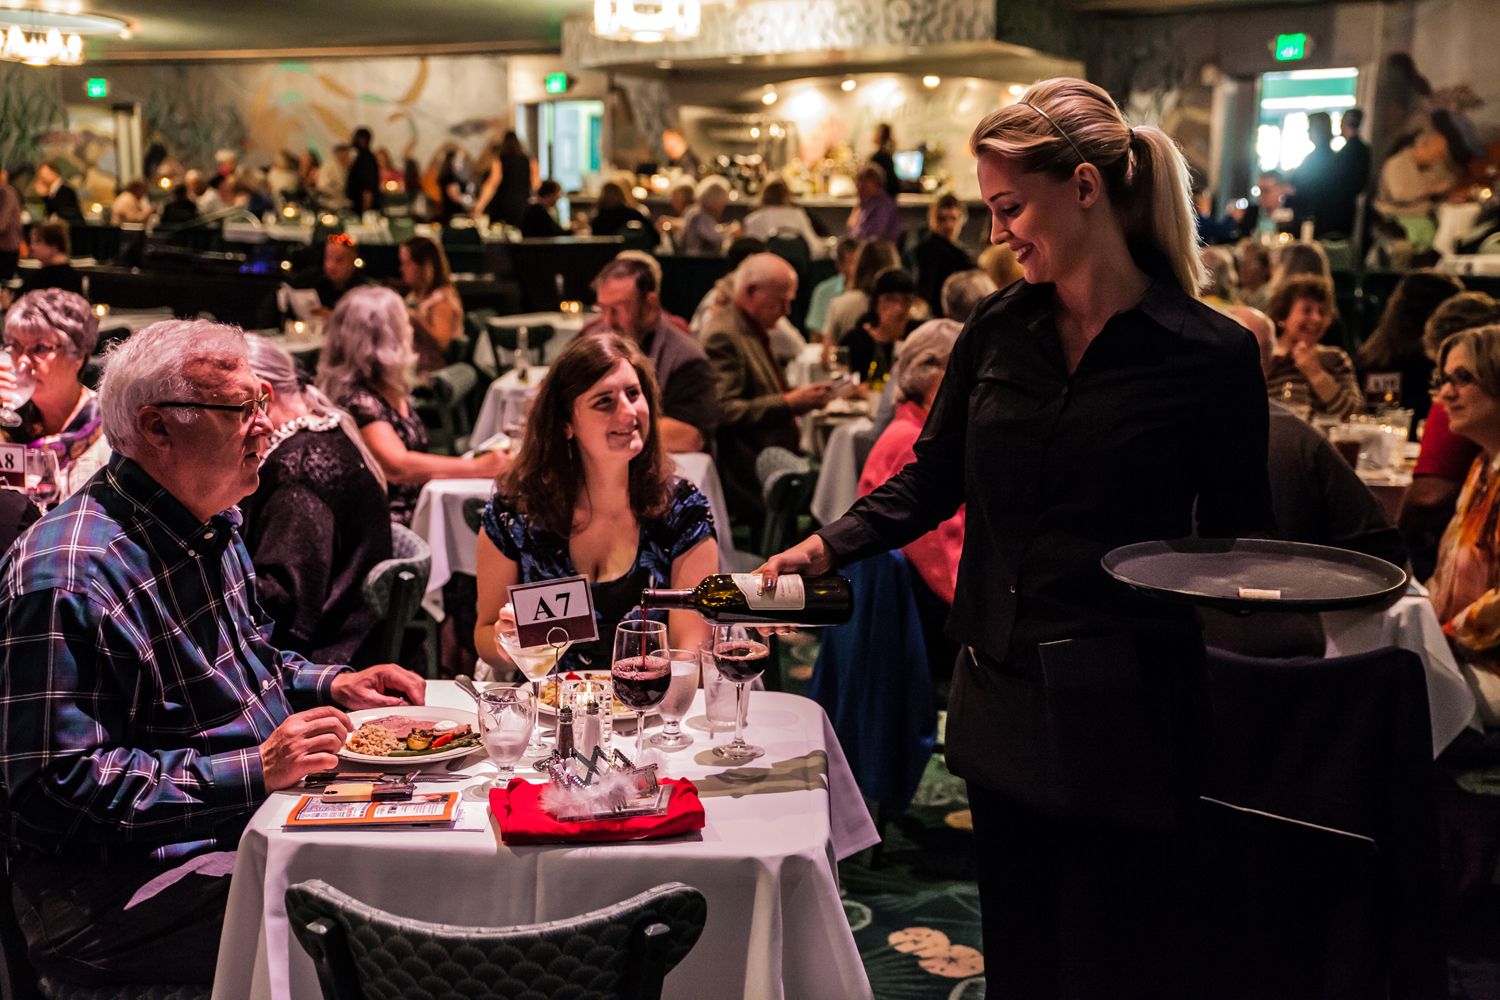 The Admiral Theatre is the Northwest's premier dinner theatre experience, combining the best in live entertainment and fine dining in a dramatic art deco venue.